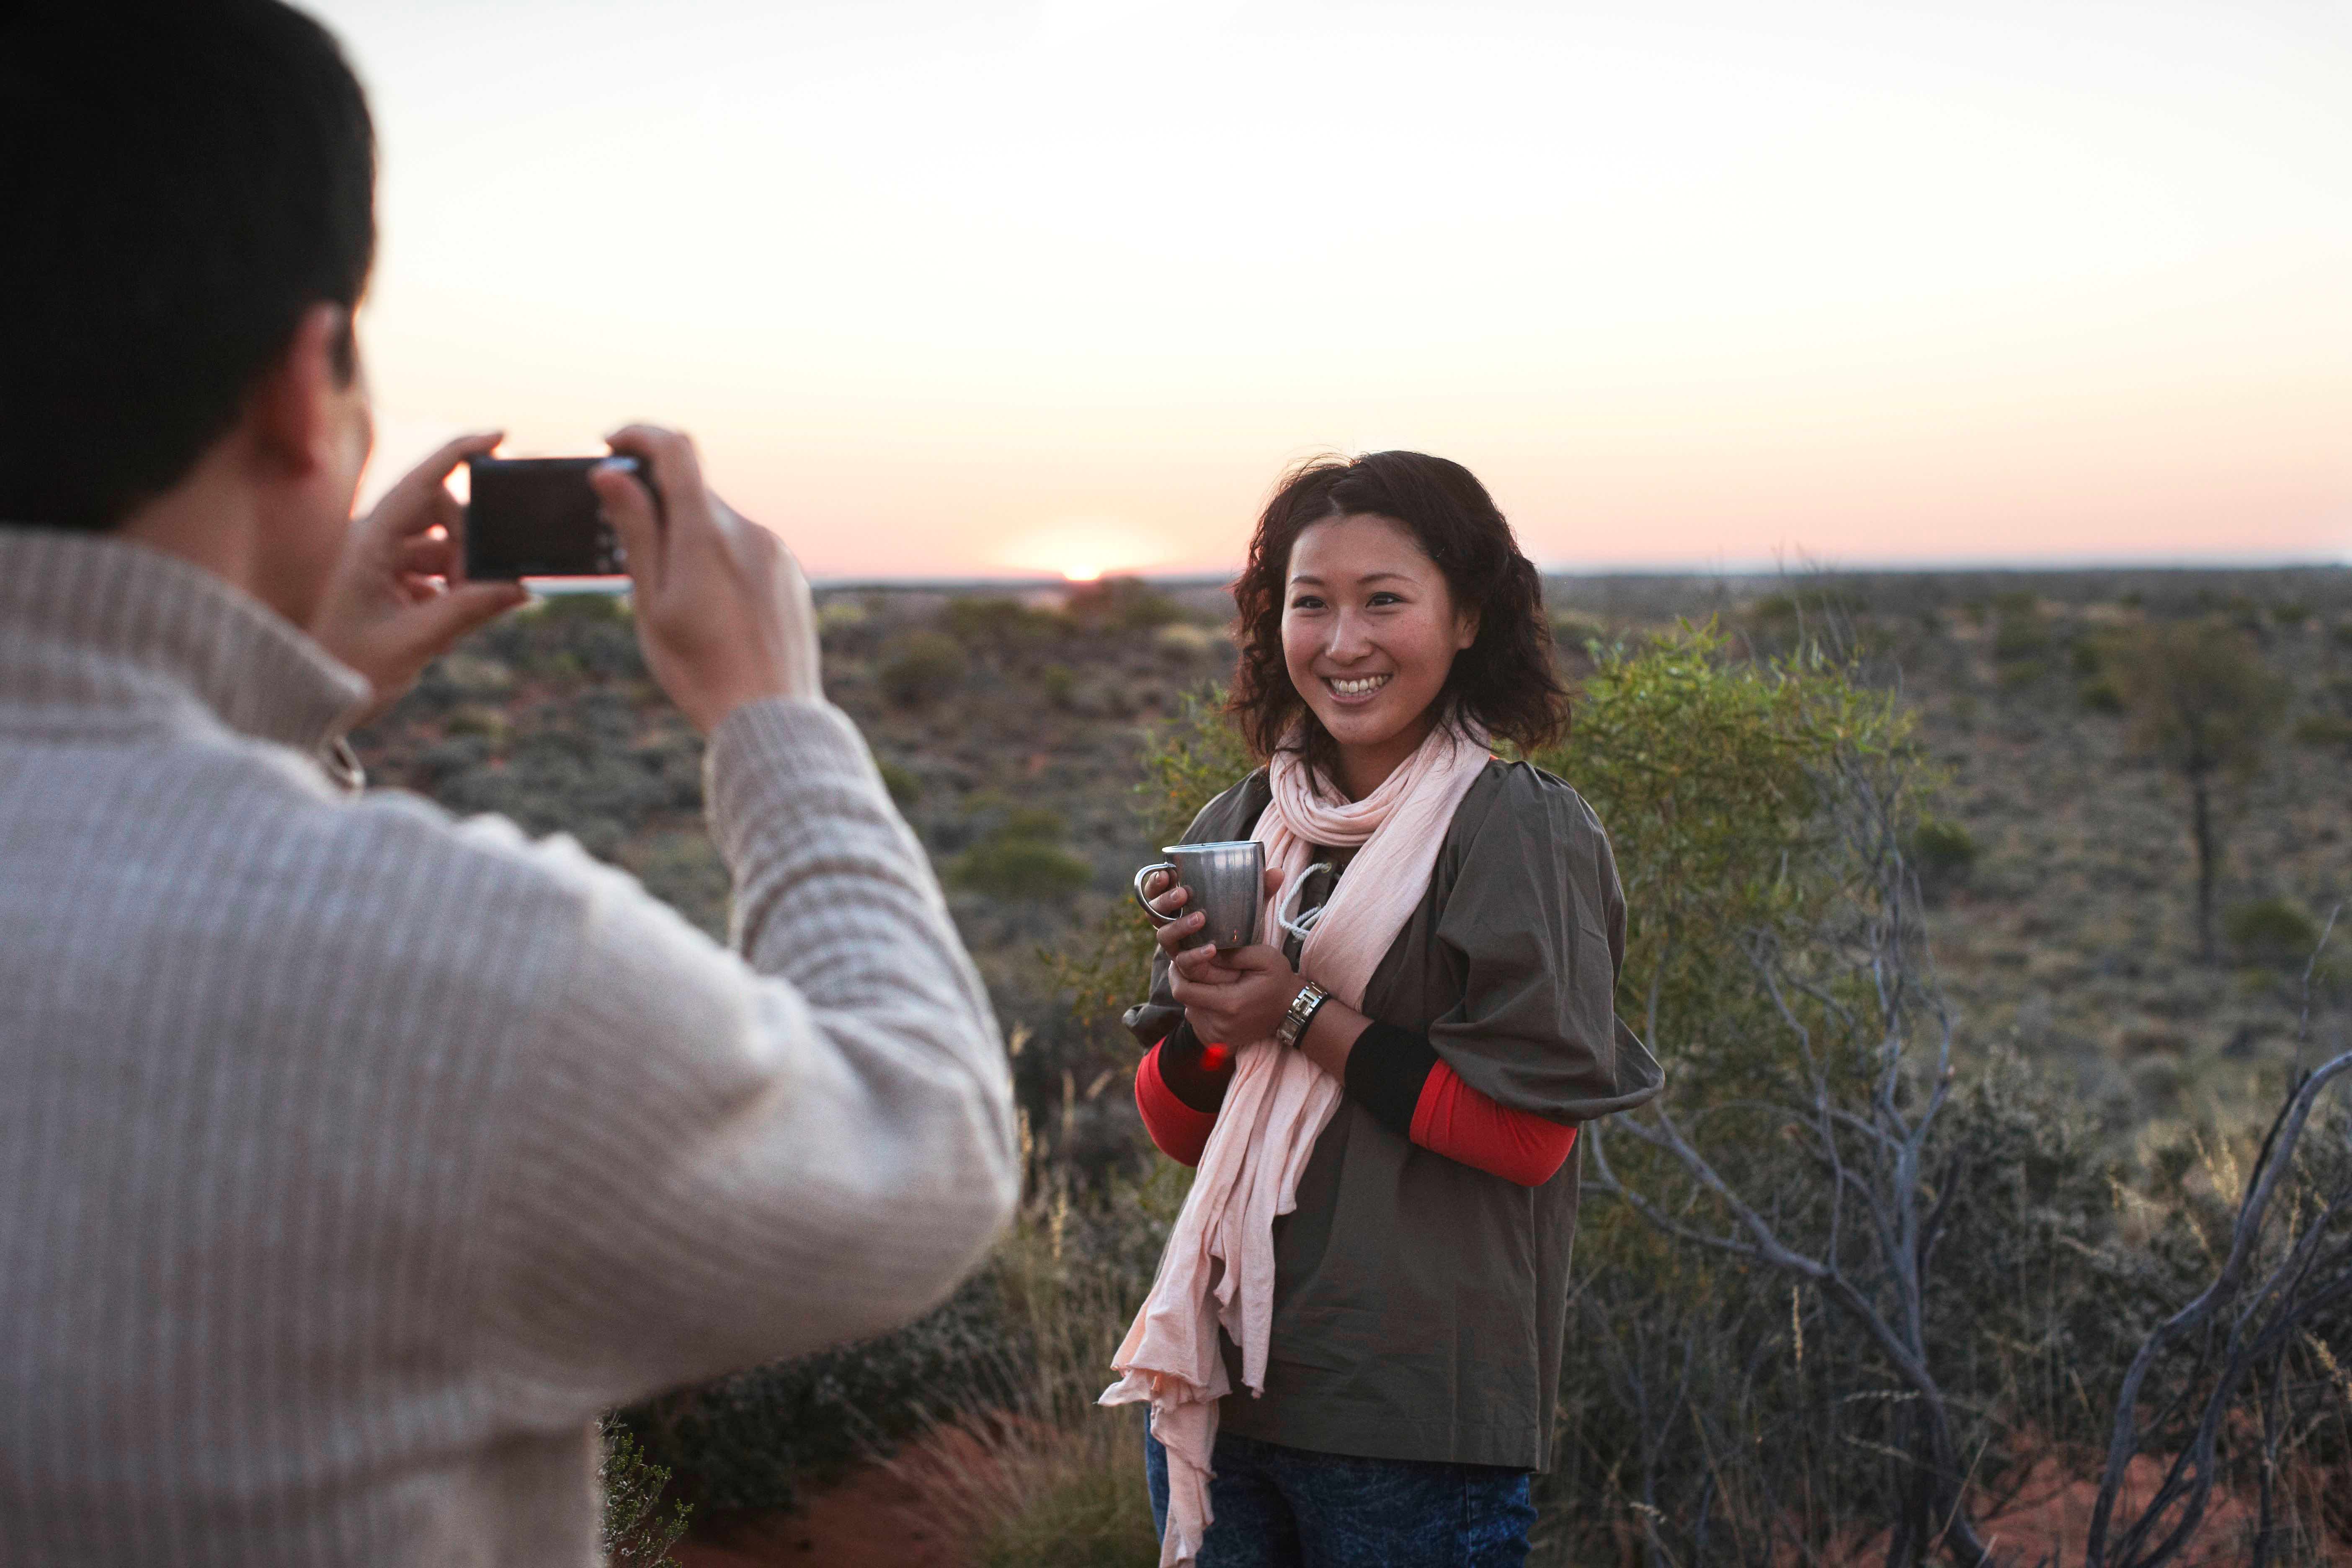 Couple taking photo in outback